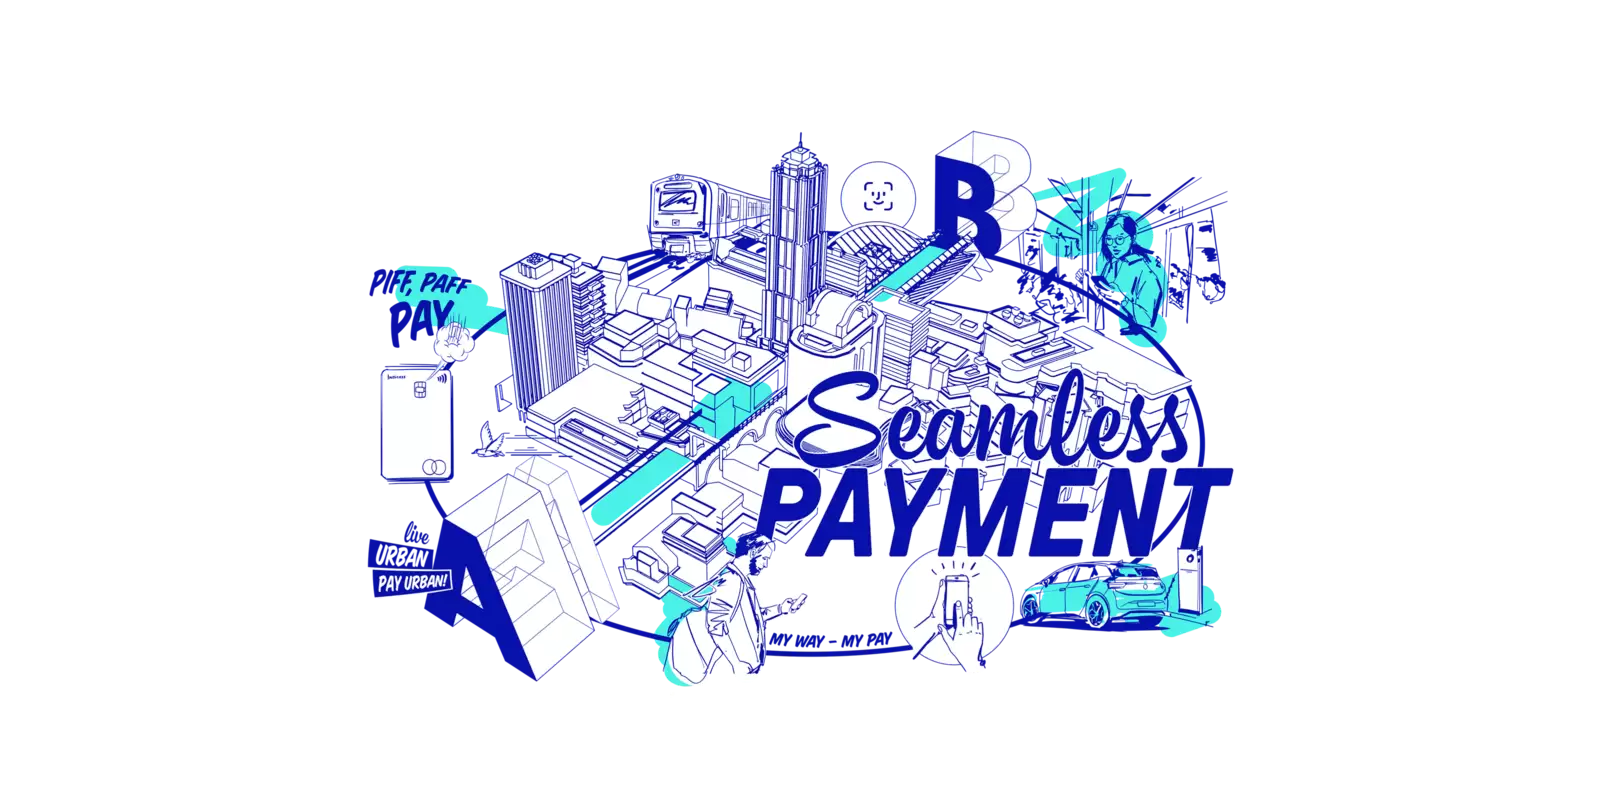 MOBILITY & PAYMENTS